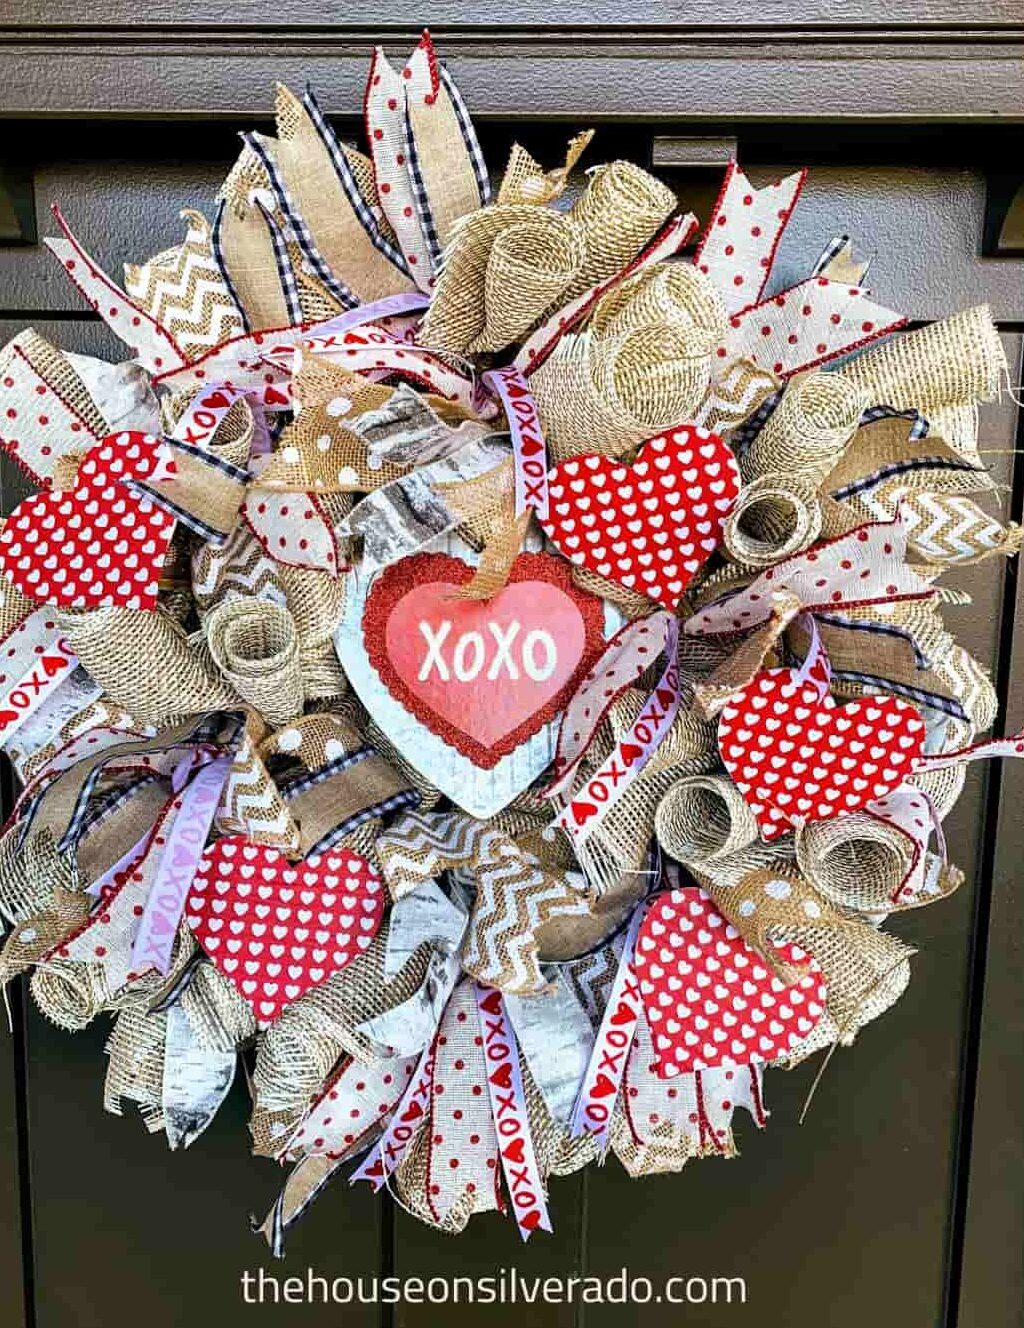 image shows burlap wreath with red hearts.